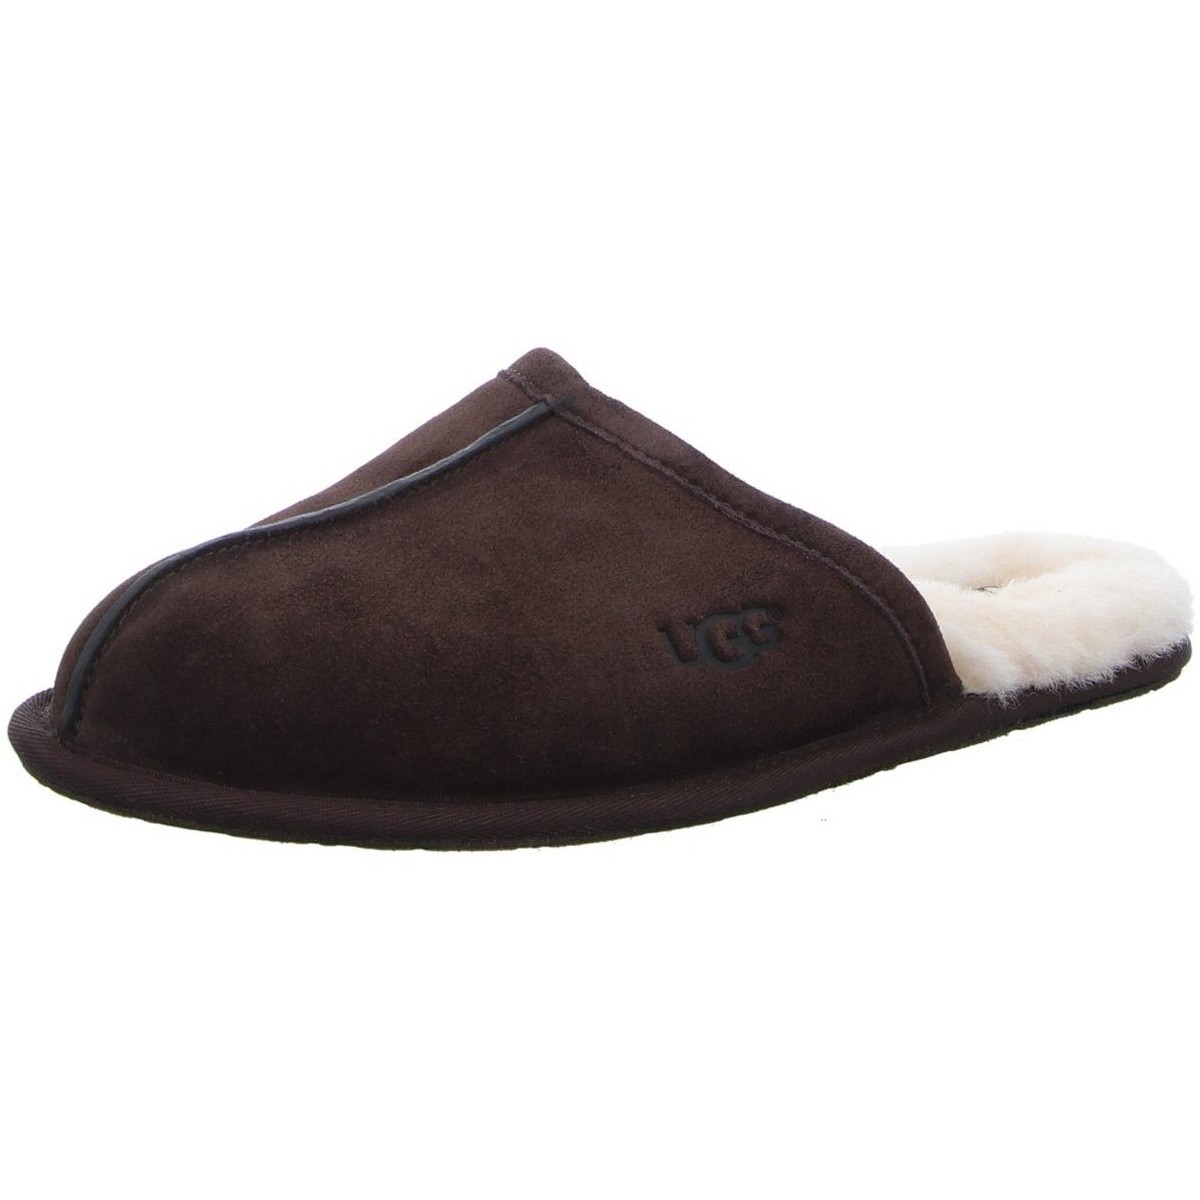 Chaussures Homme Chaussons UGG  Marron